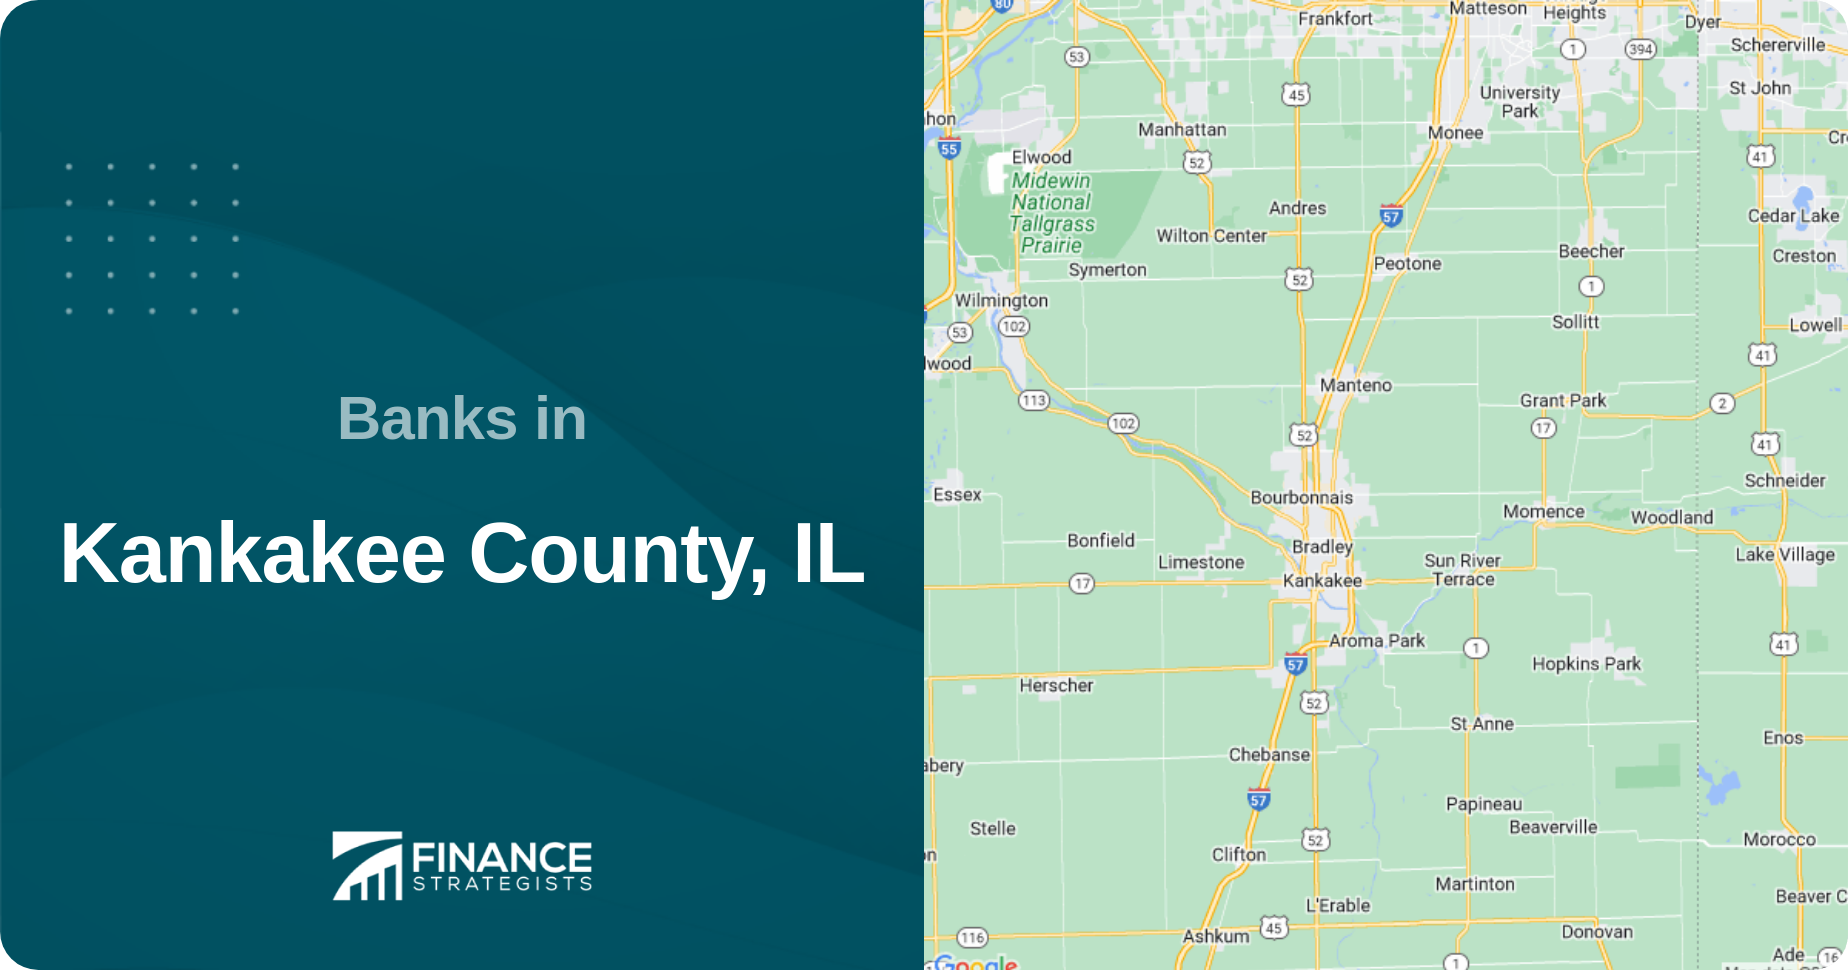 Banks in Kankakee County, IL